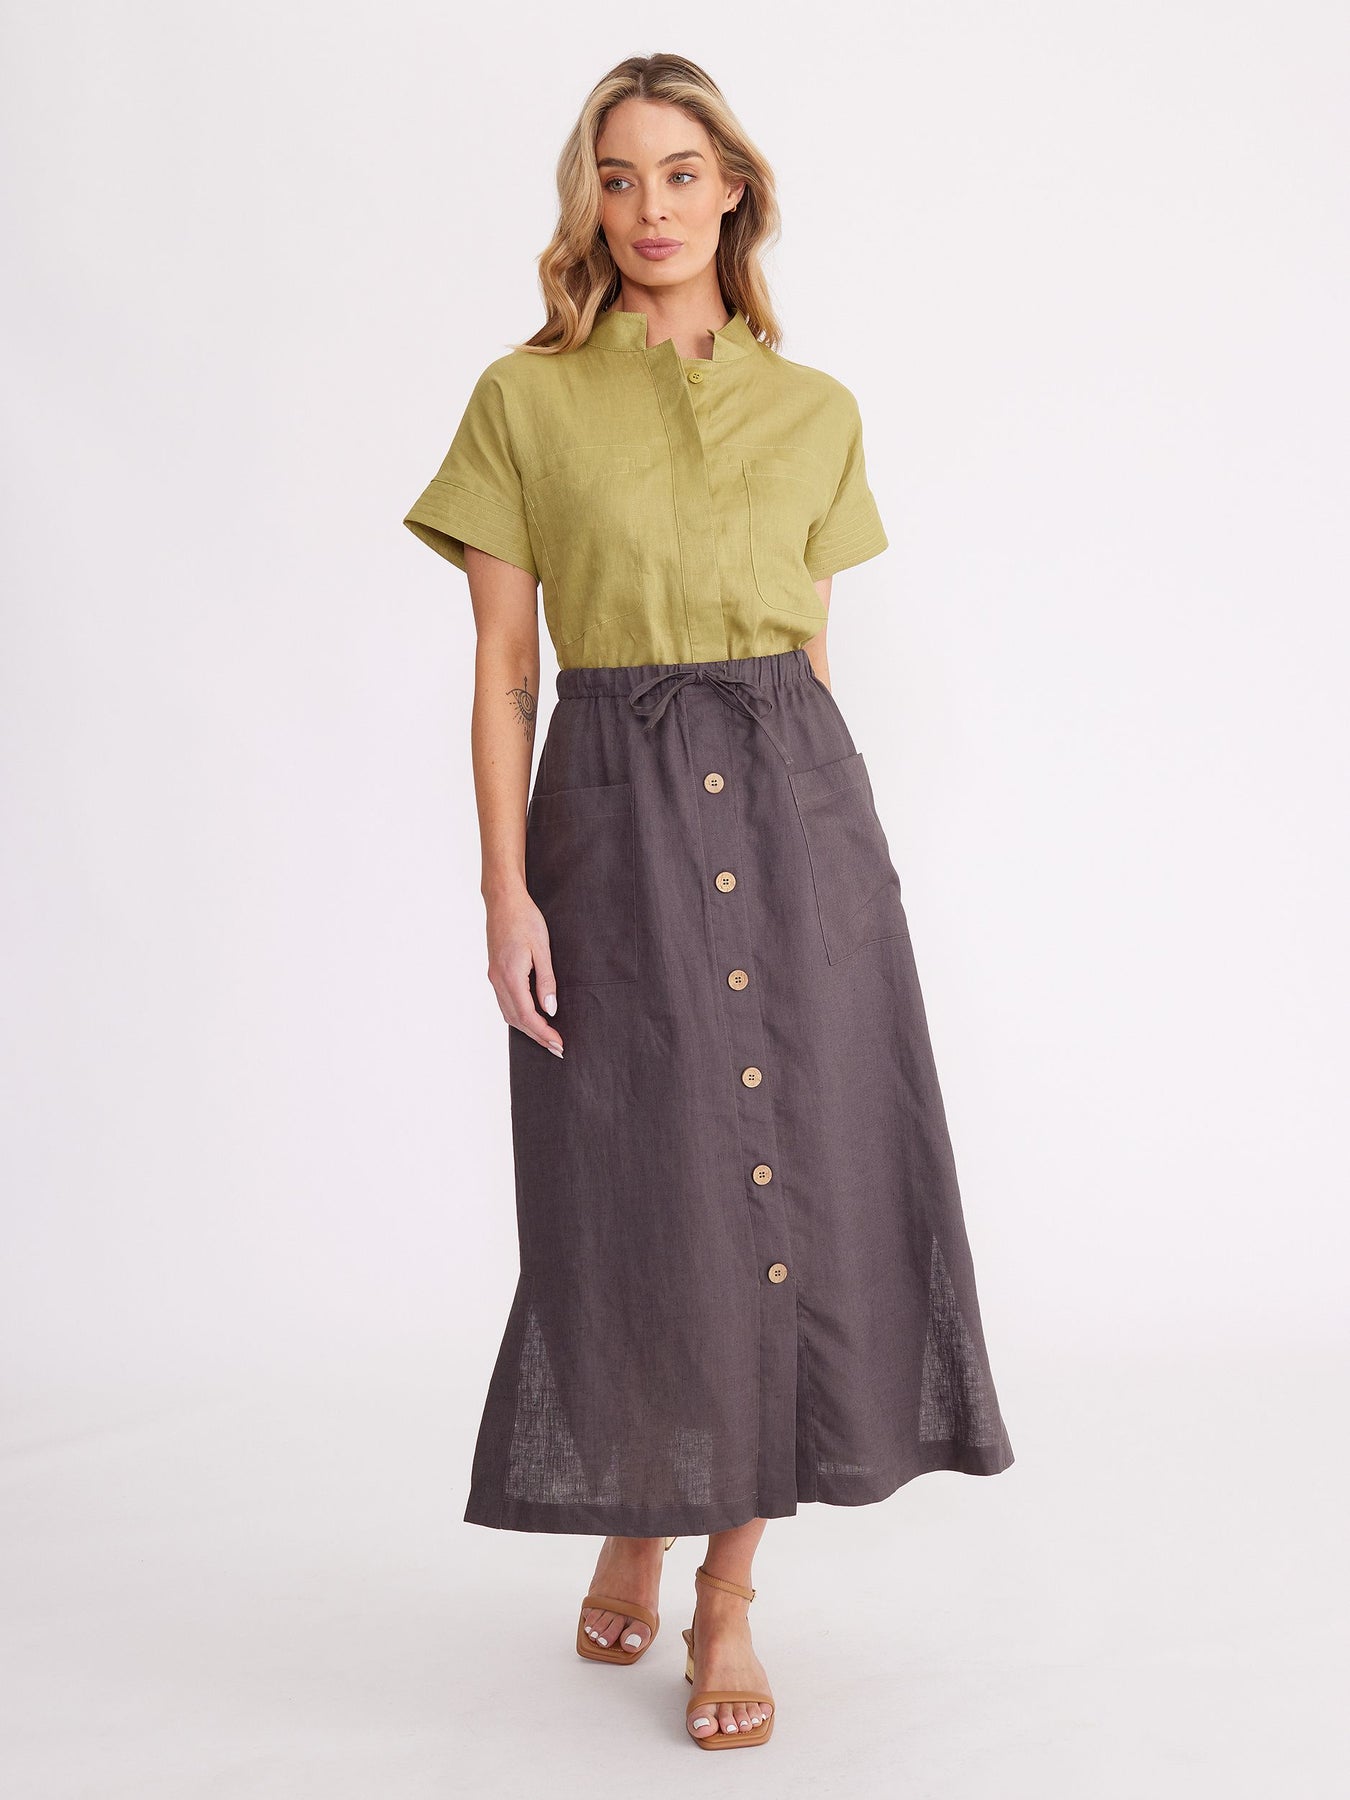 YARRA TRAIL GATHERED SKIRT - CHARCOAL - THE VOGUE STORE